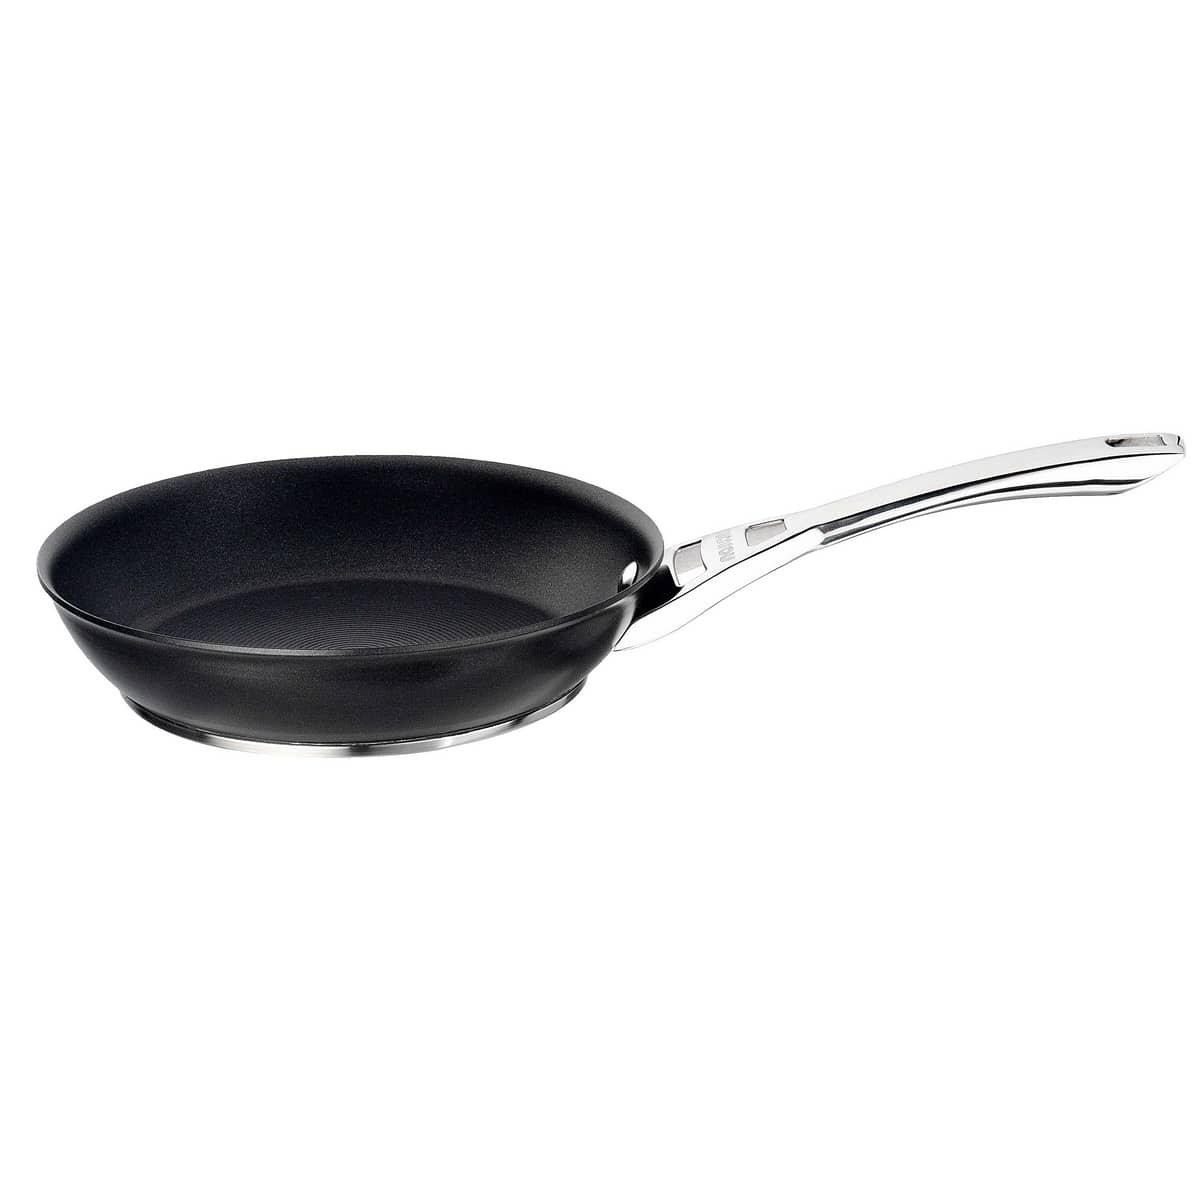 Skillet Pan with Riveted Handle Dishwasher Safe Sturdy Cookware - 25 cm